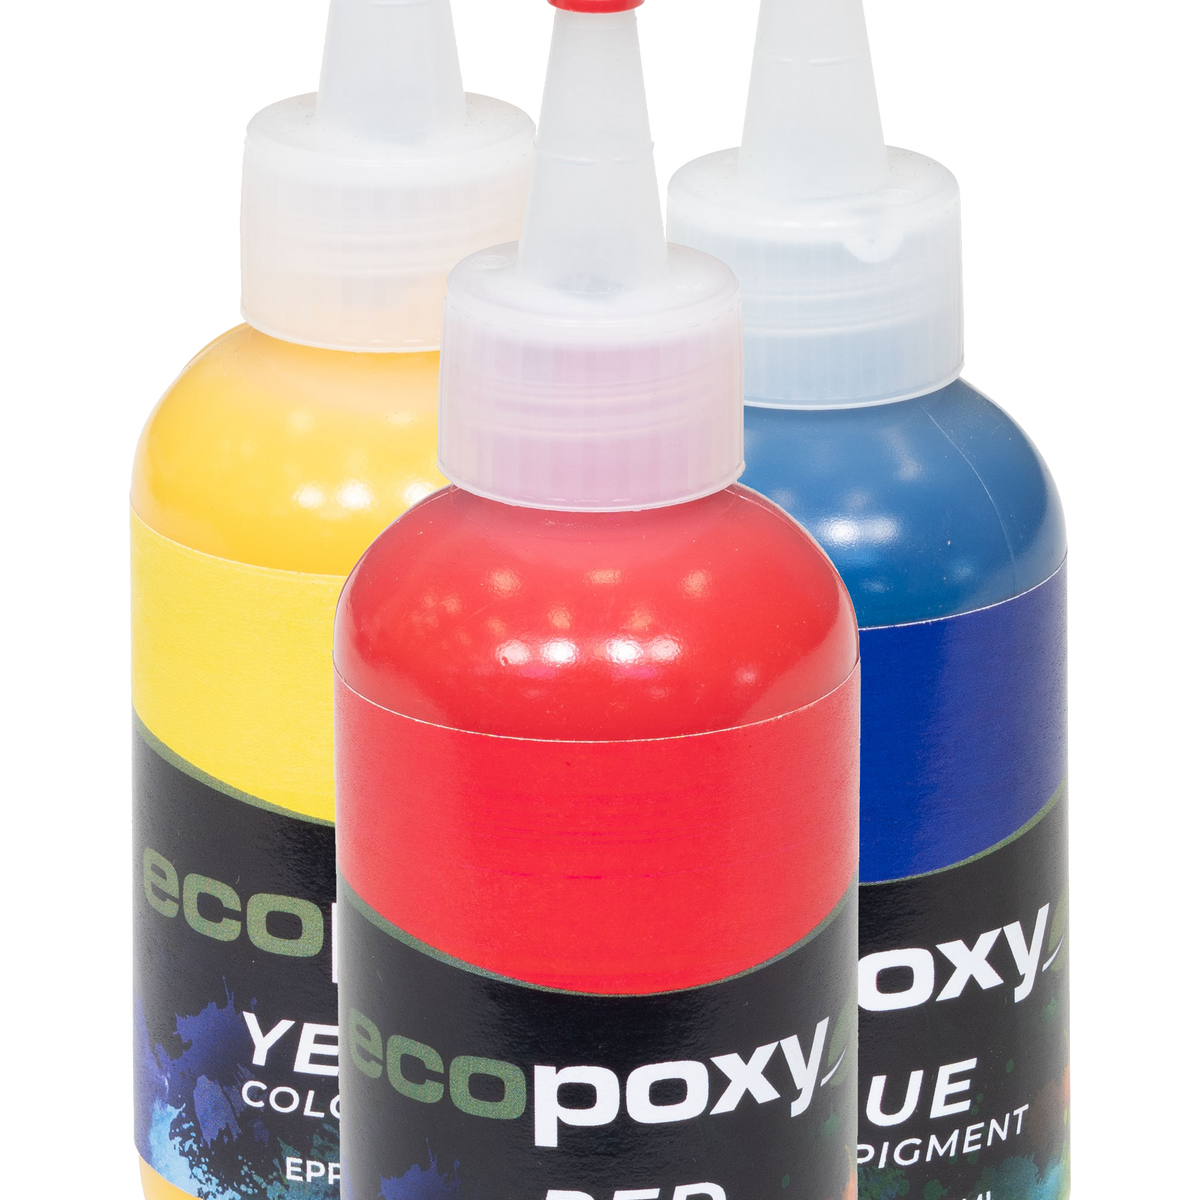 EcoPoxy 15g Metallic Resin Color Pigment Powder for Stunning Epoxy Resin  Art - Epoxy Wood Filler for Woodworkers and Artists - Easy Mix, Create  Unique